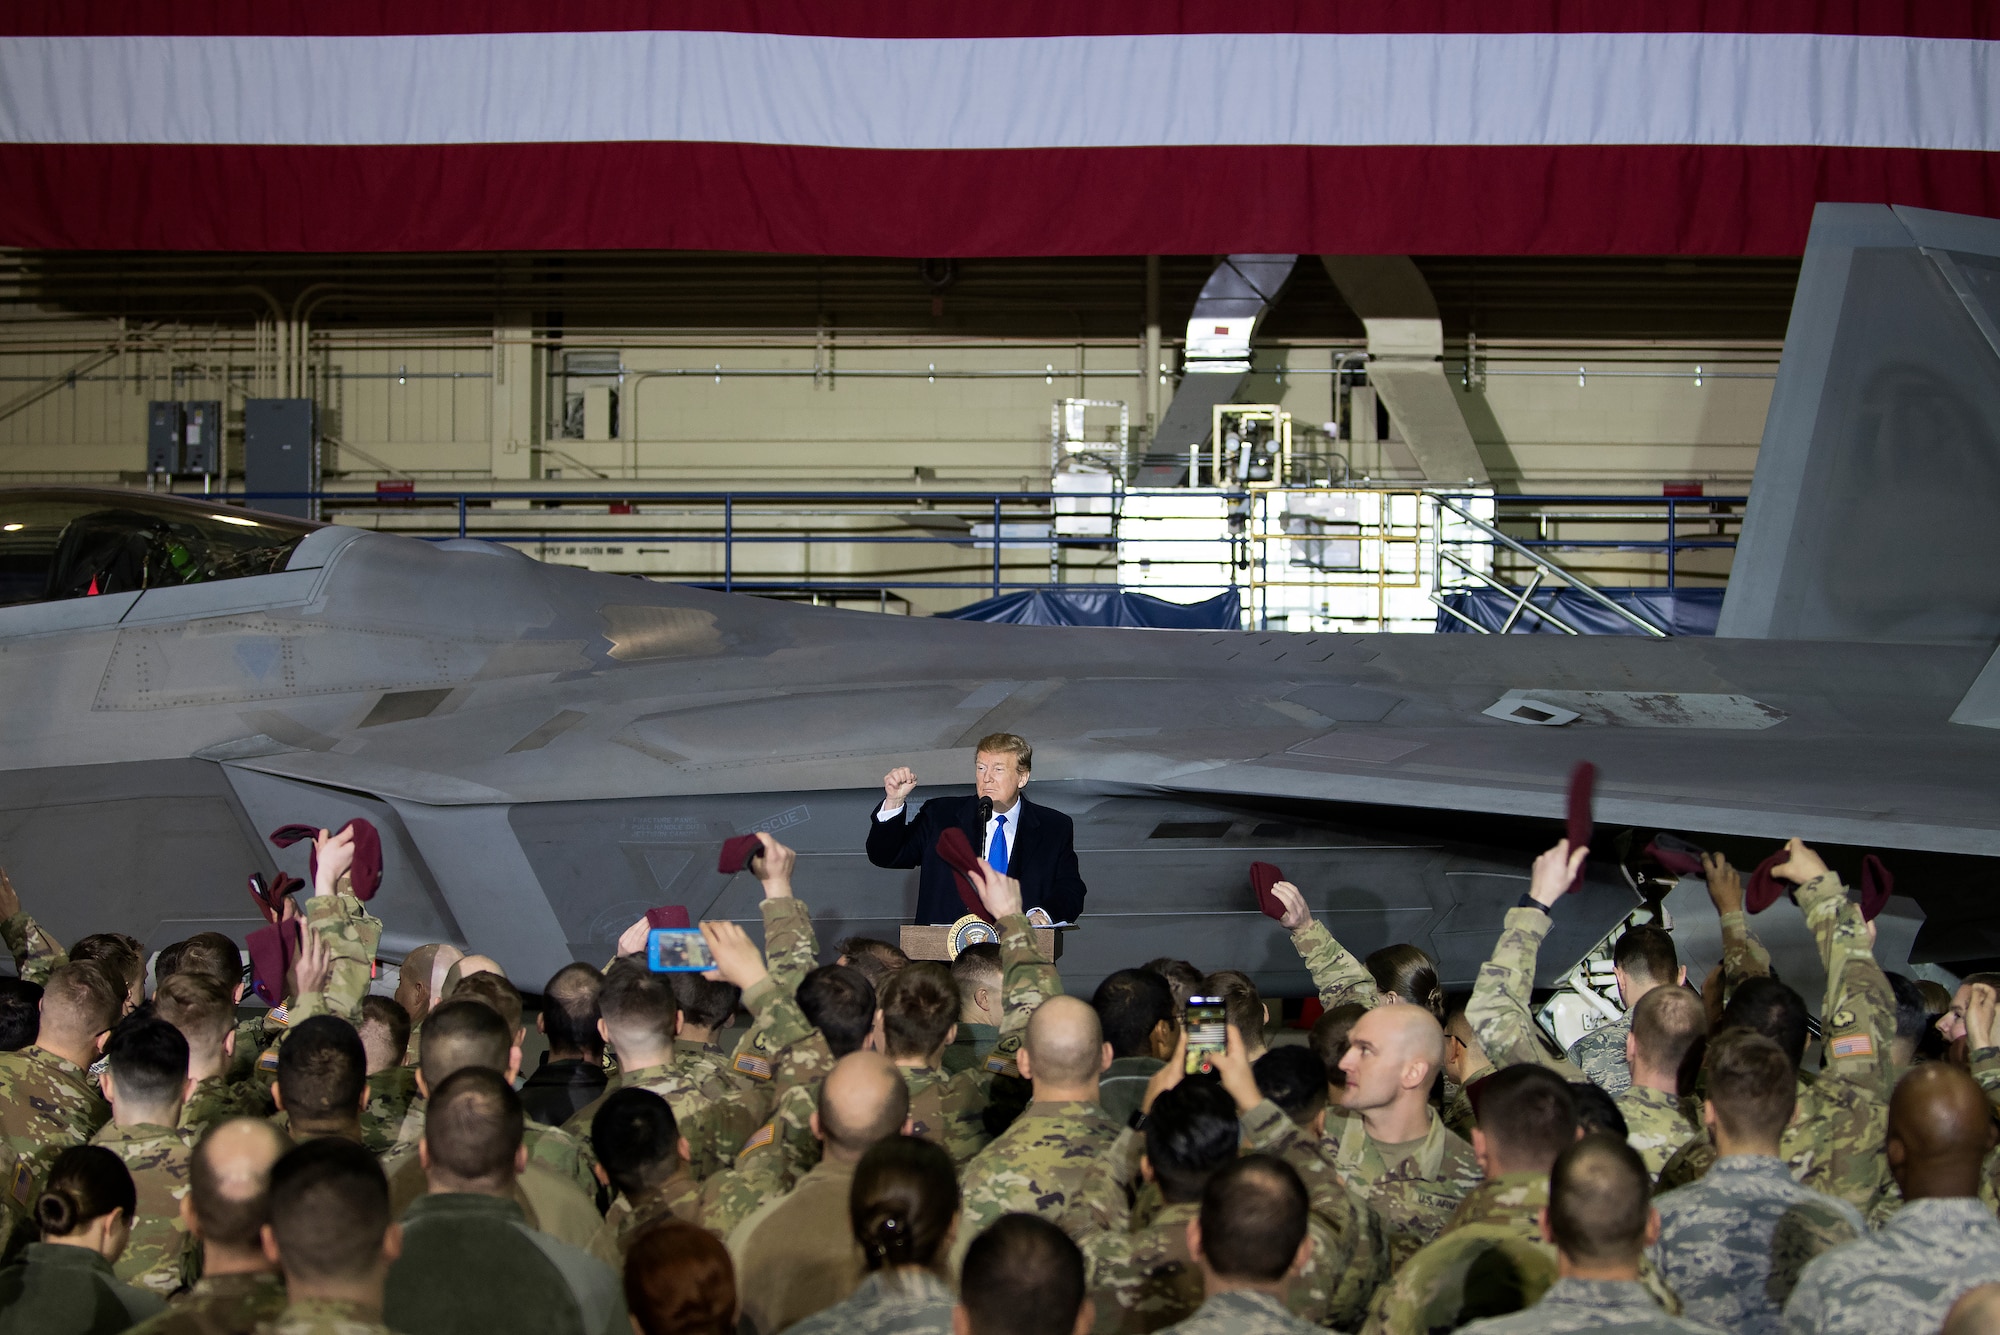 President Donald Trump speaks to service members at Joint Base Elmendorf-Richardson, Alaska, Feb. 28, 2019. The President was at the base to meet with service members after returning from a summit in Hanoi, Vietnam. (U.S. Air Force photo by Staff Sgt. Westin Warburton)